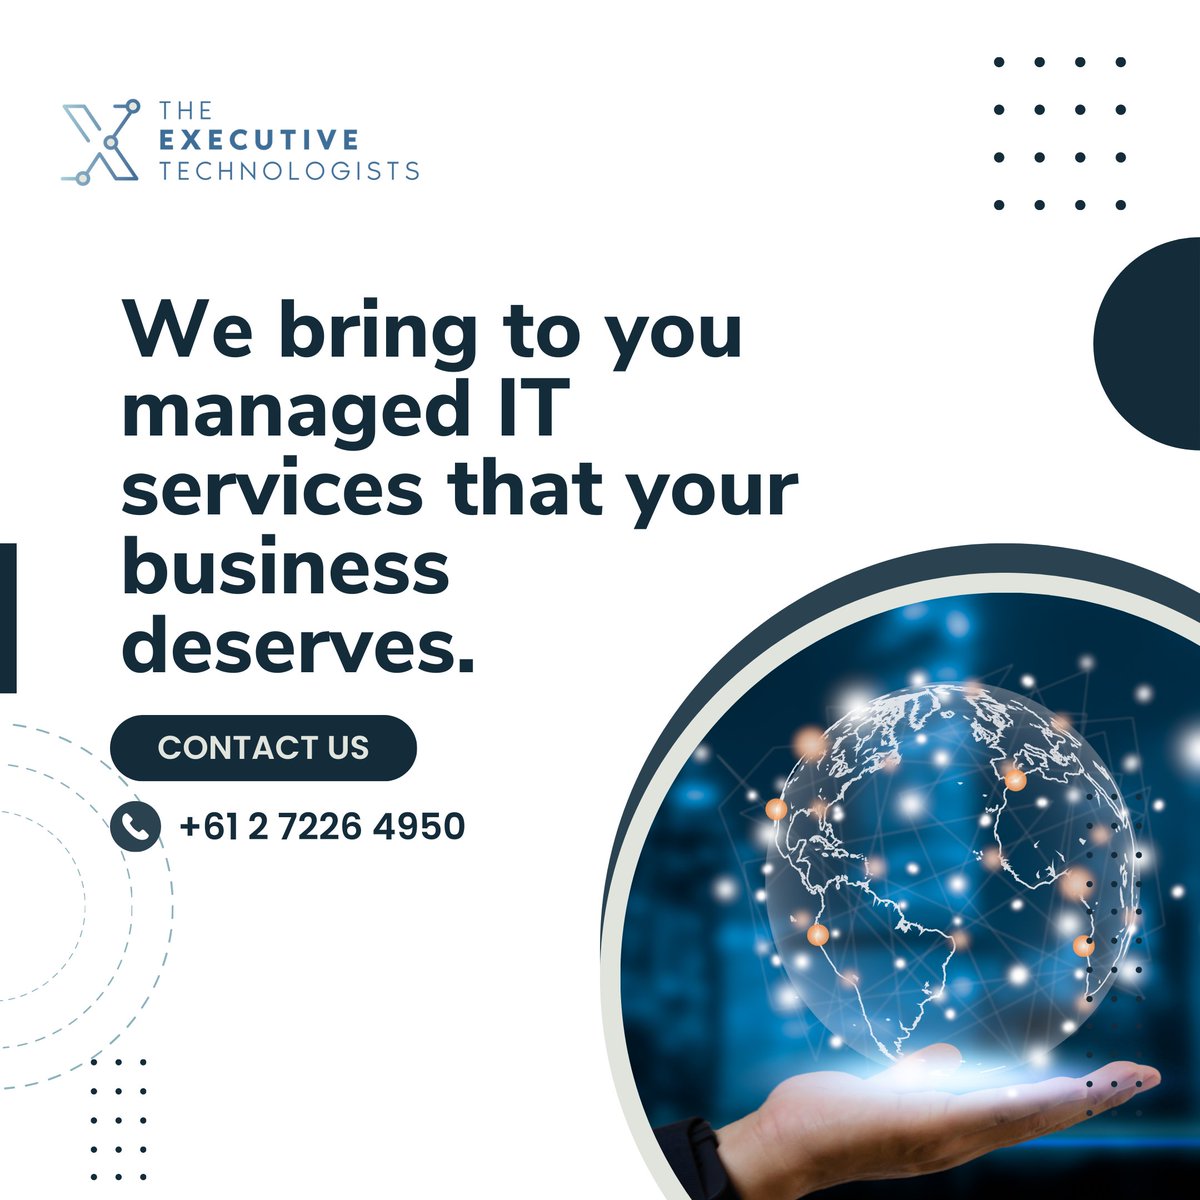 Secure your world. Secure your business.

Consult with us today. exectechs.link/QuickChat

#TheExecTechs #TomorrowsFutureToday #FutureReadyBusiness #MSP #ManagedIT #ManagedServiceProvider